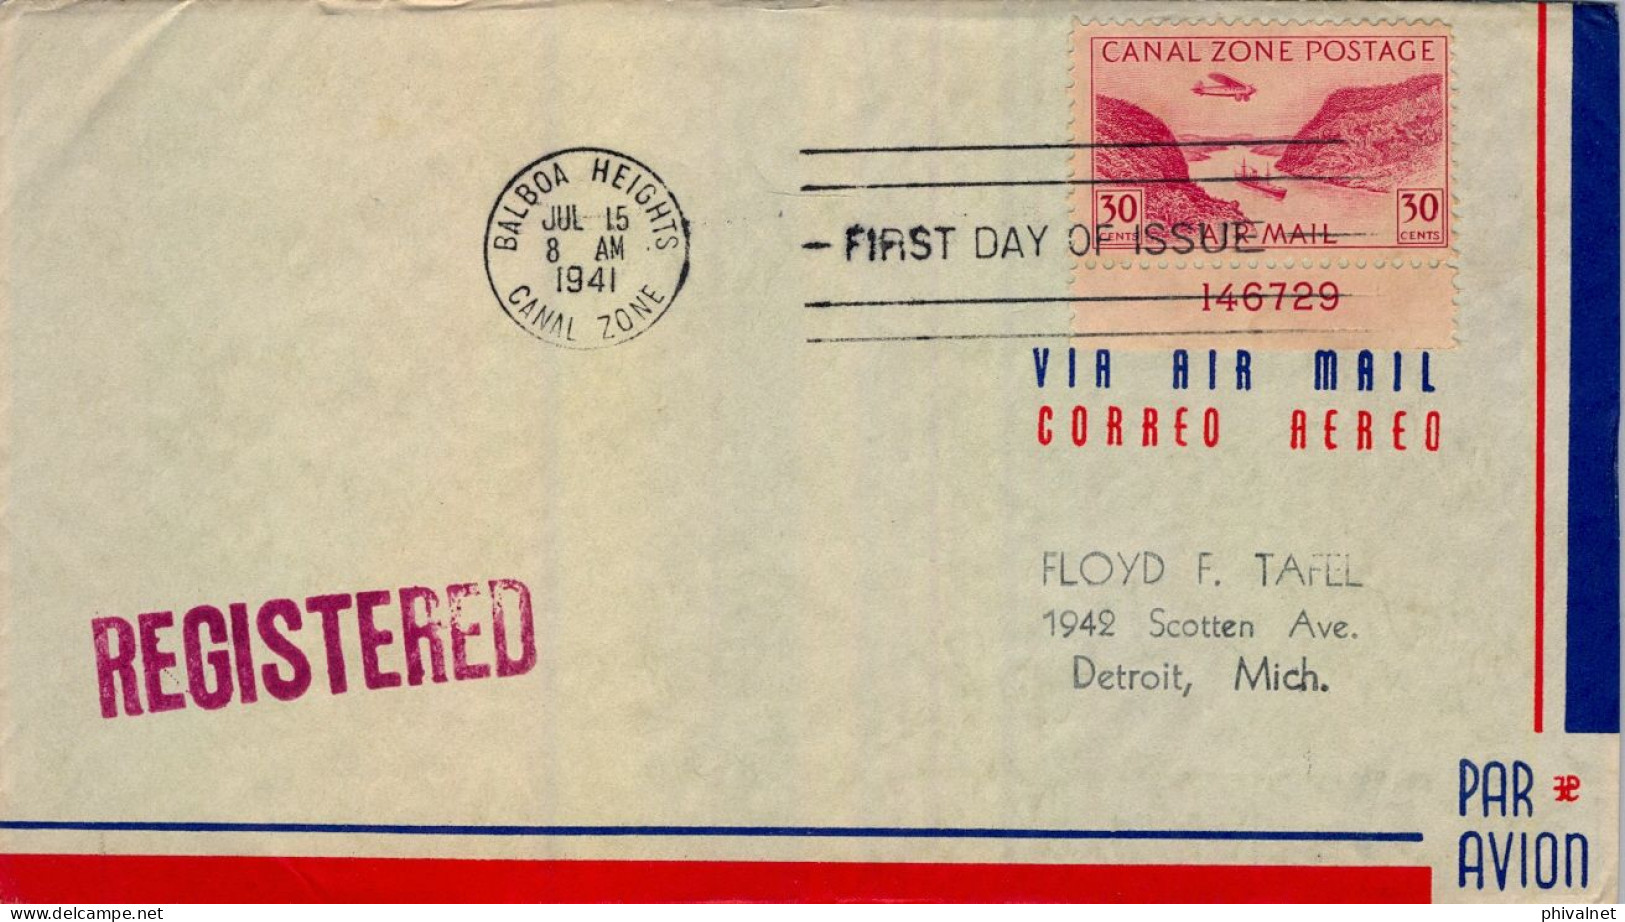 1941 CANAL ZONE , BALBOA HEIGHTS - DETROIT , PRIMER DIA , FIRST DAY COVER , YV. 8A AÉR. VISTA DEL CANAL - Canal Zone